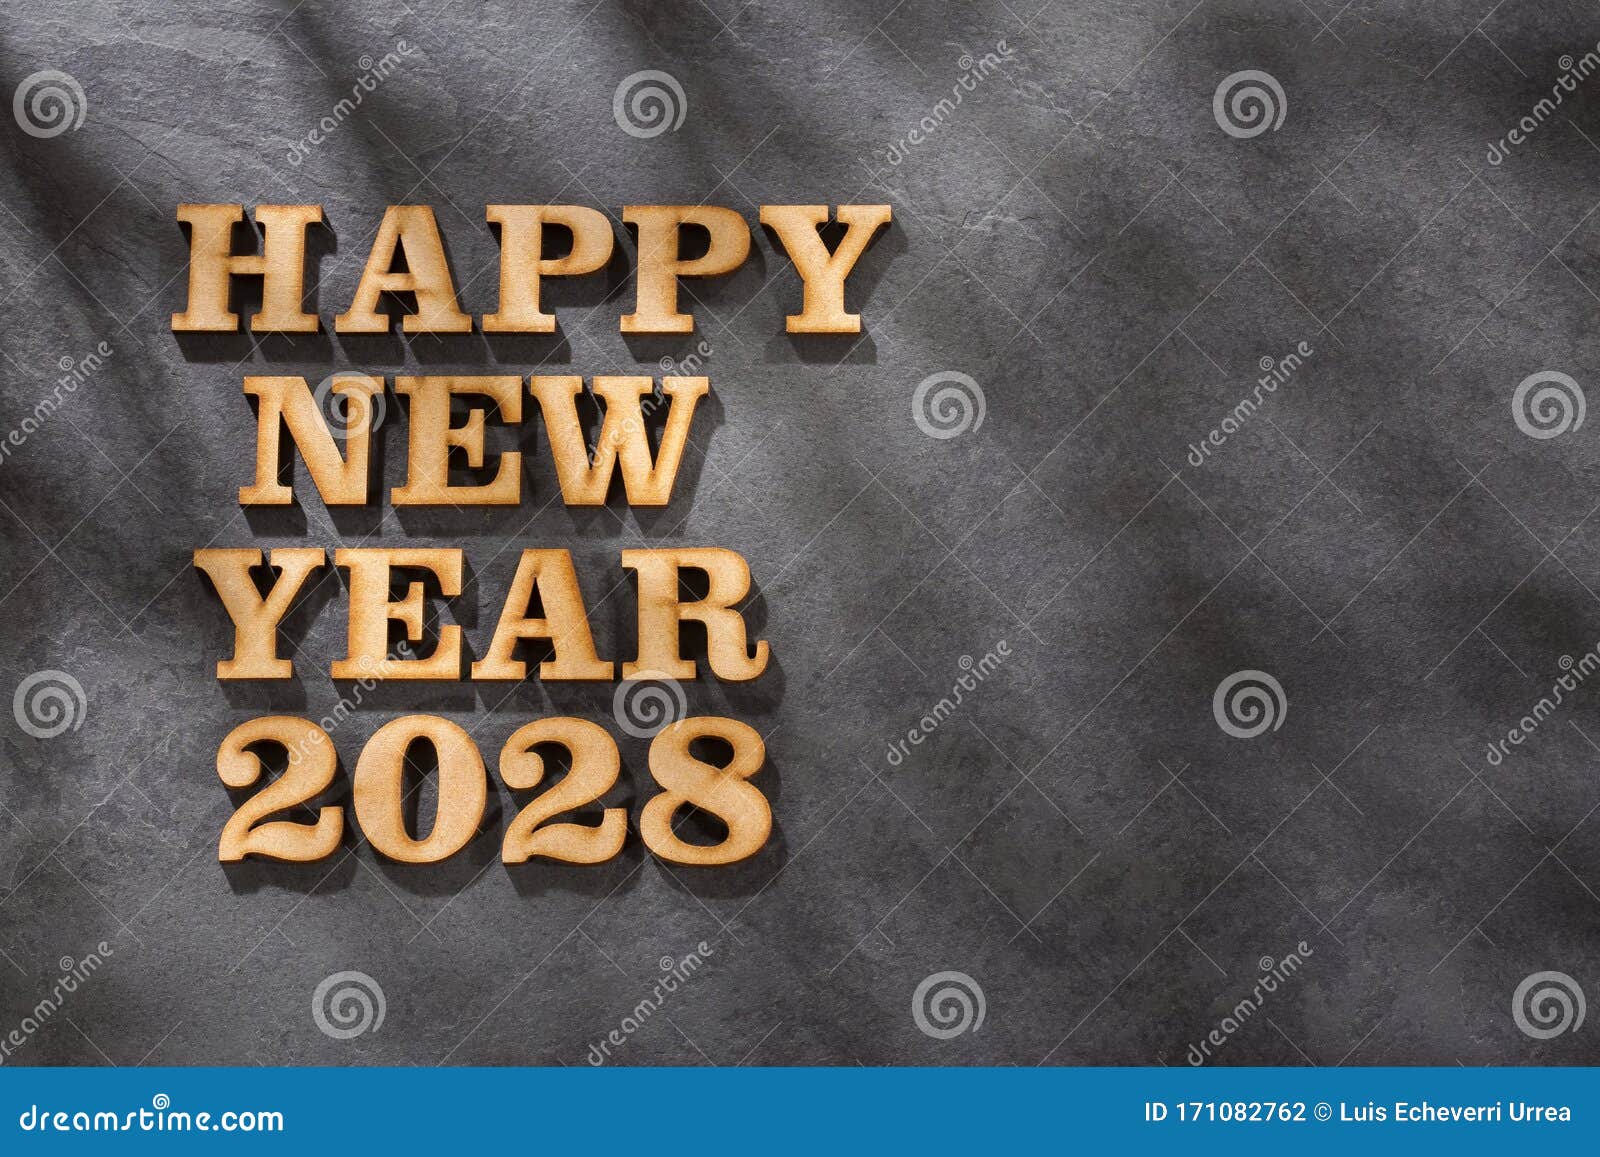 Happy New Year 2028 Text Space Stock Photo Image Of Holiday 2028